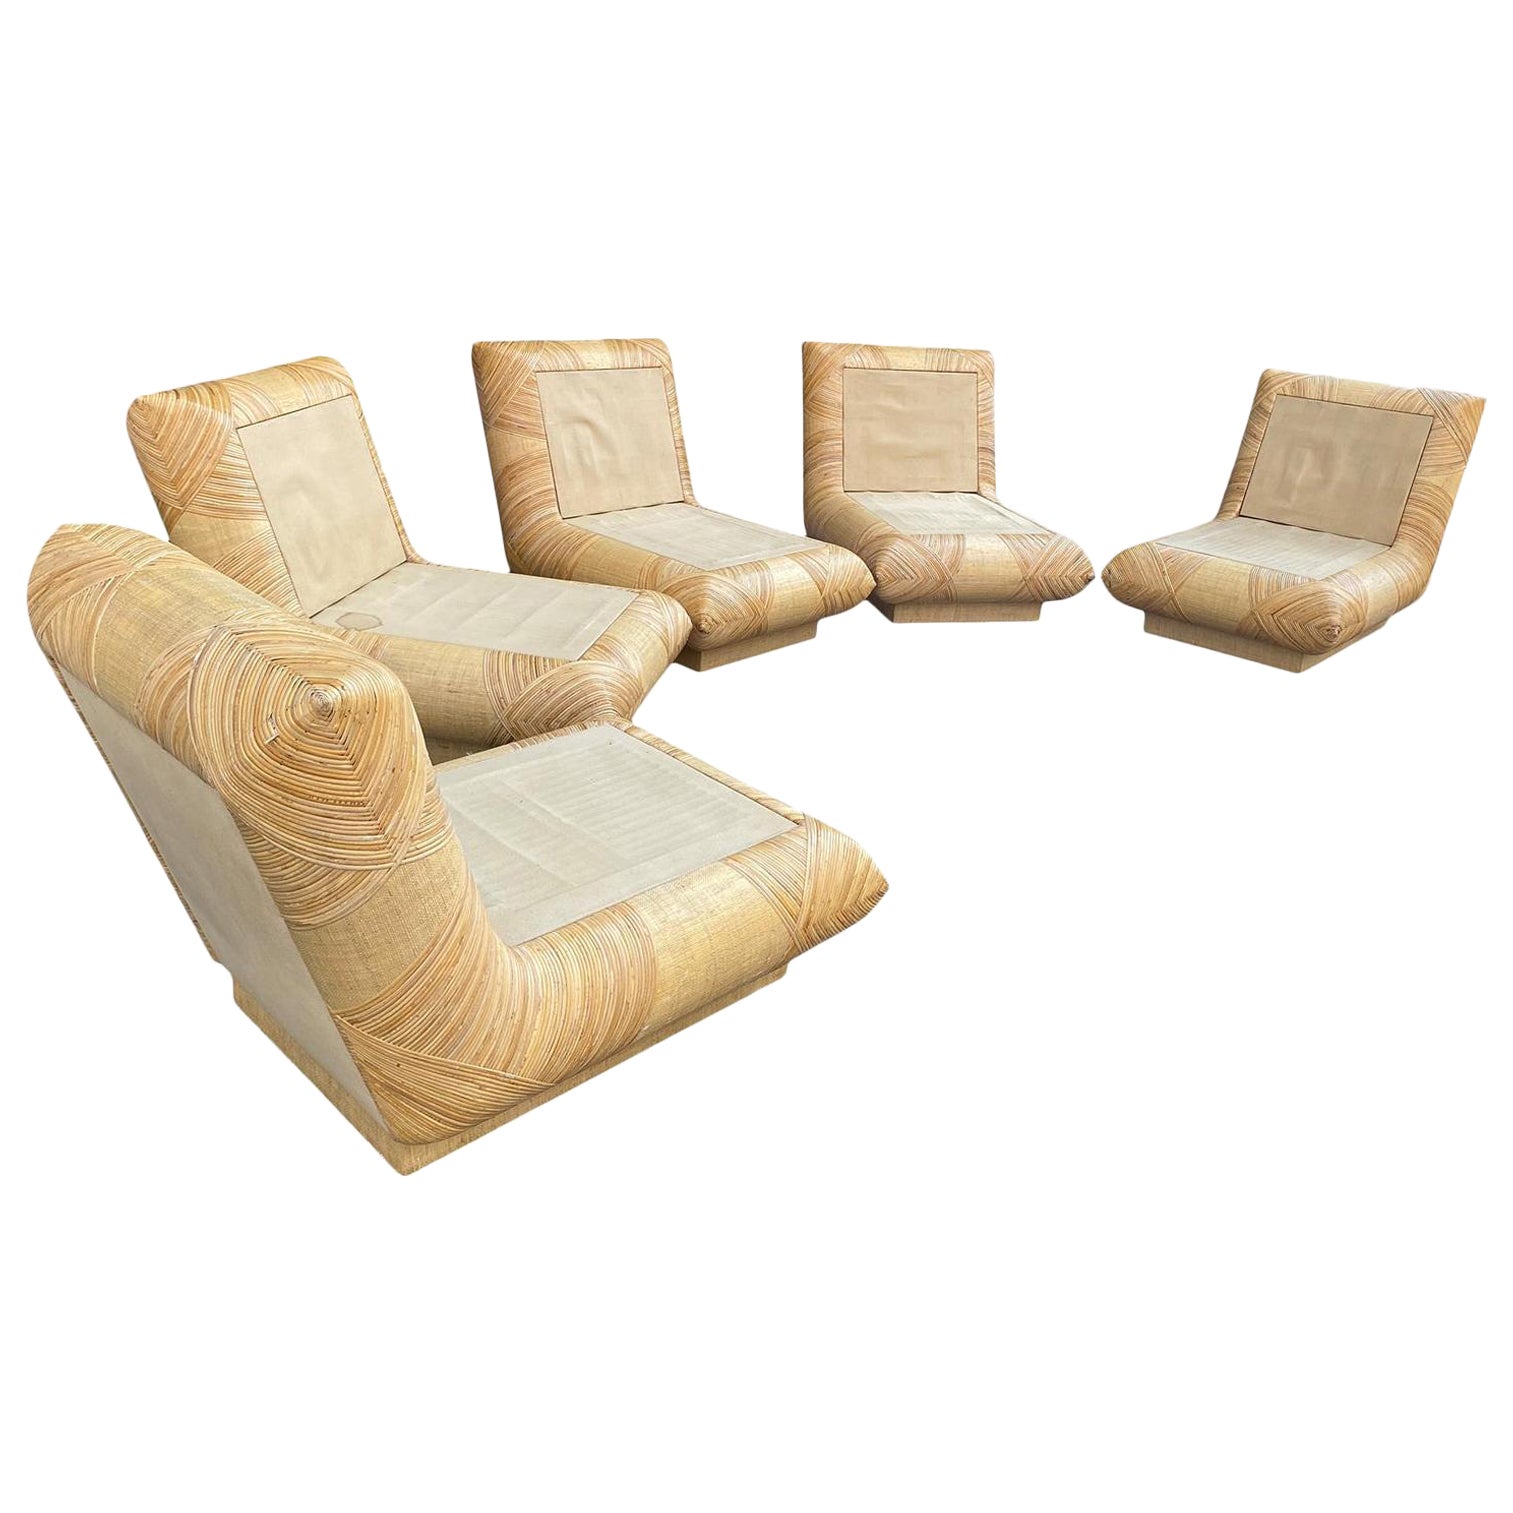 1970s Rattan Wrapped Bamboo Unique Slipper Lounge Chairs For Sale